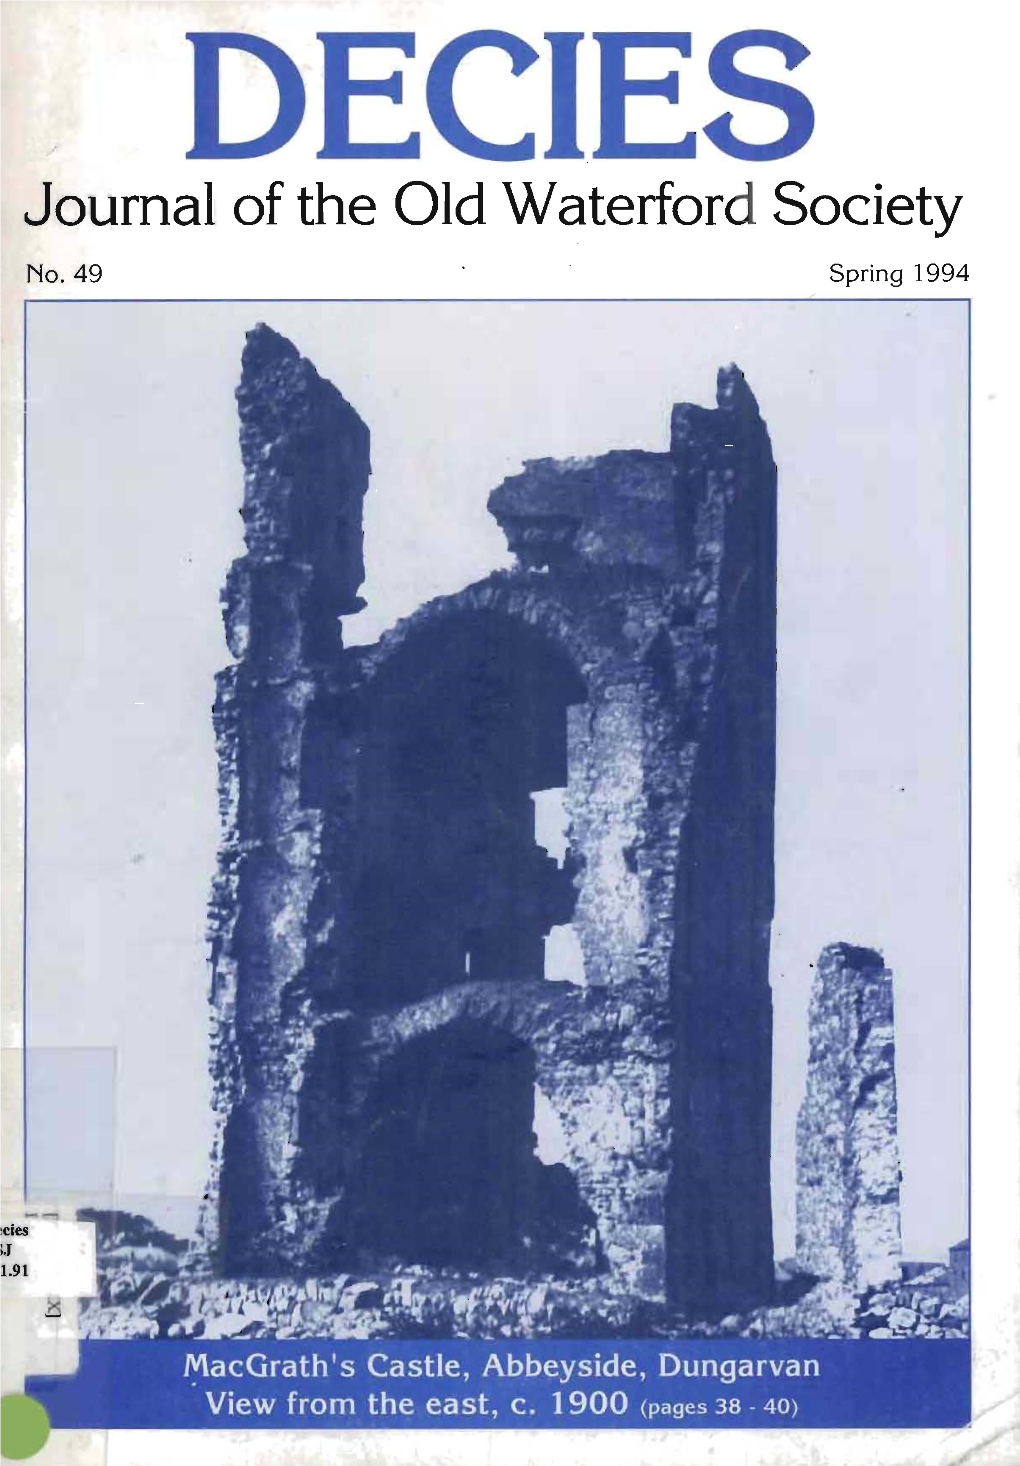 Decies Journal of the Old Waterford Society. No. 49, Spring 1994